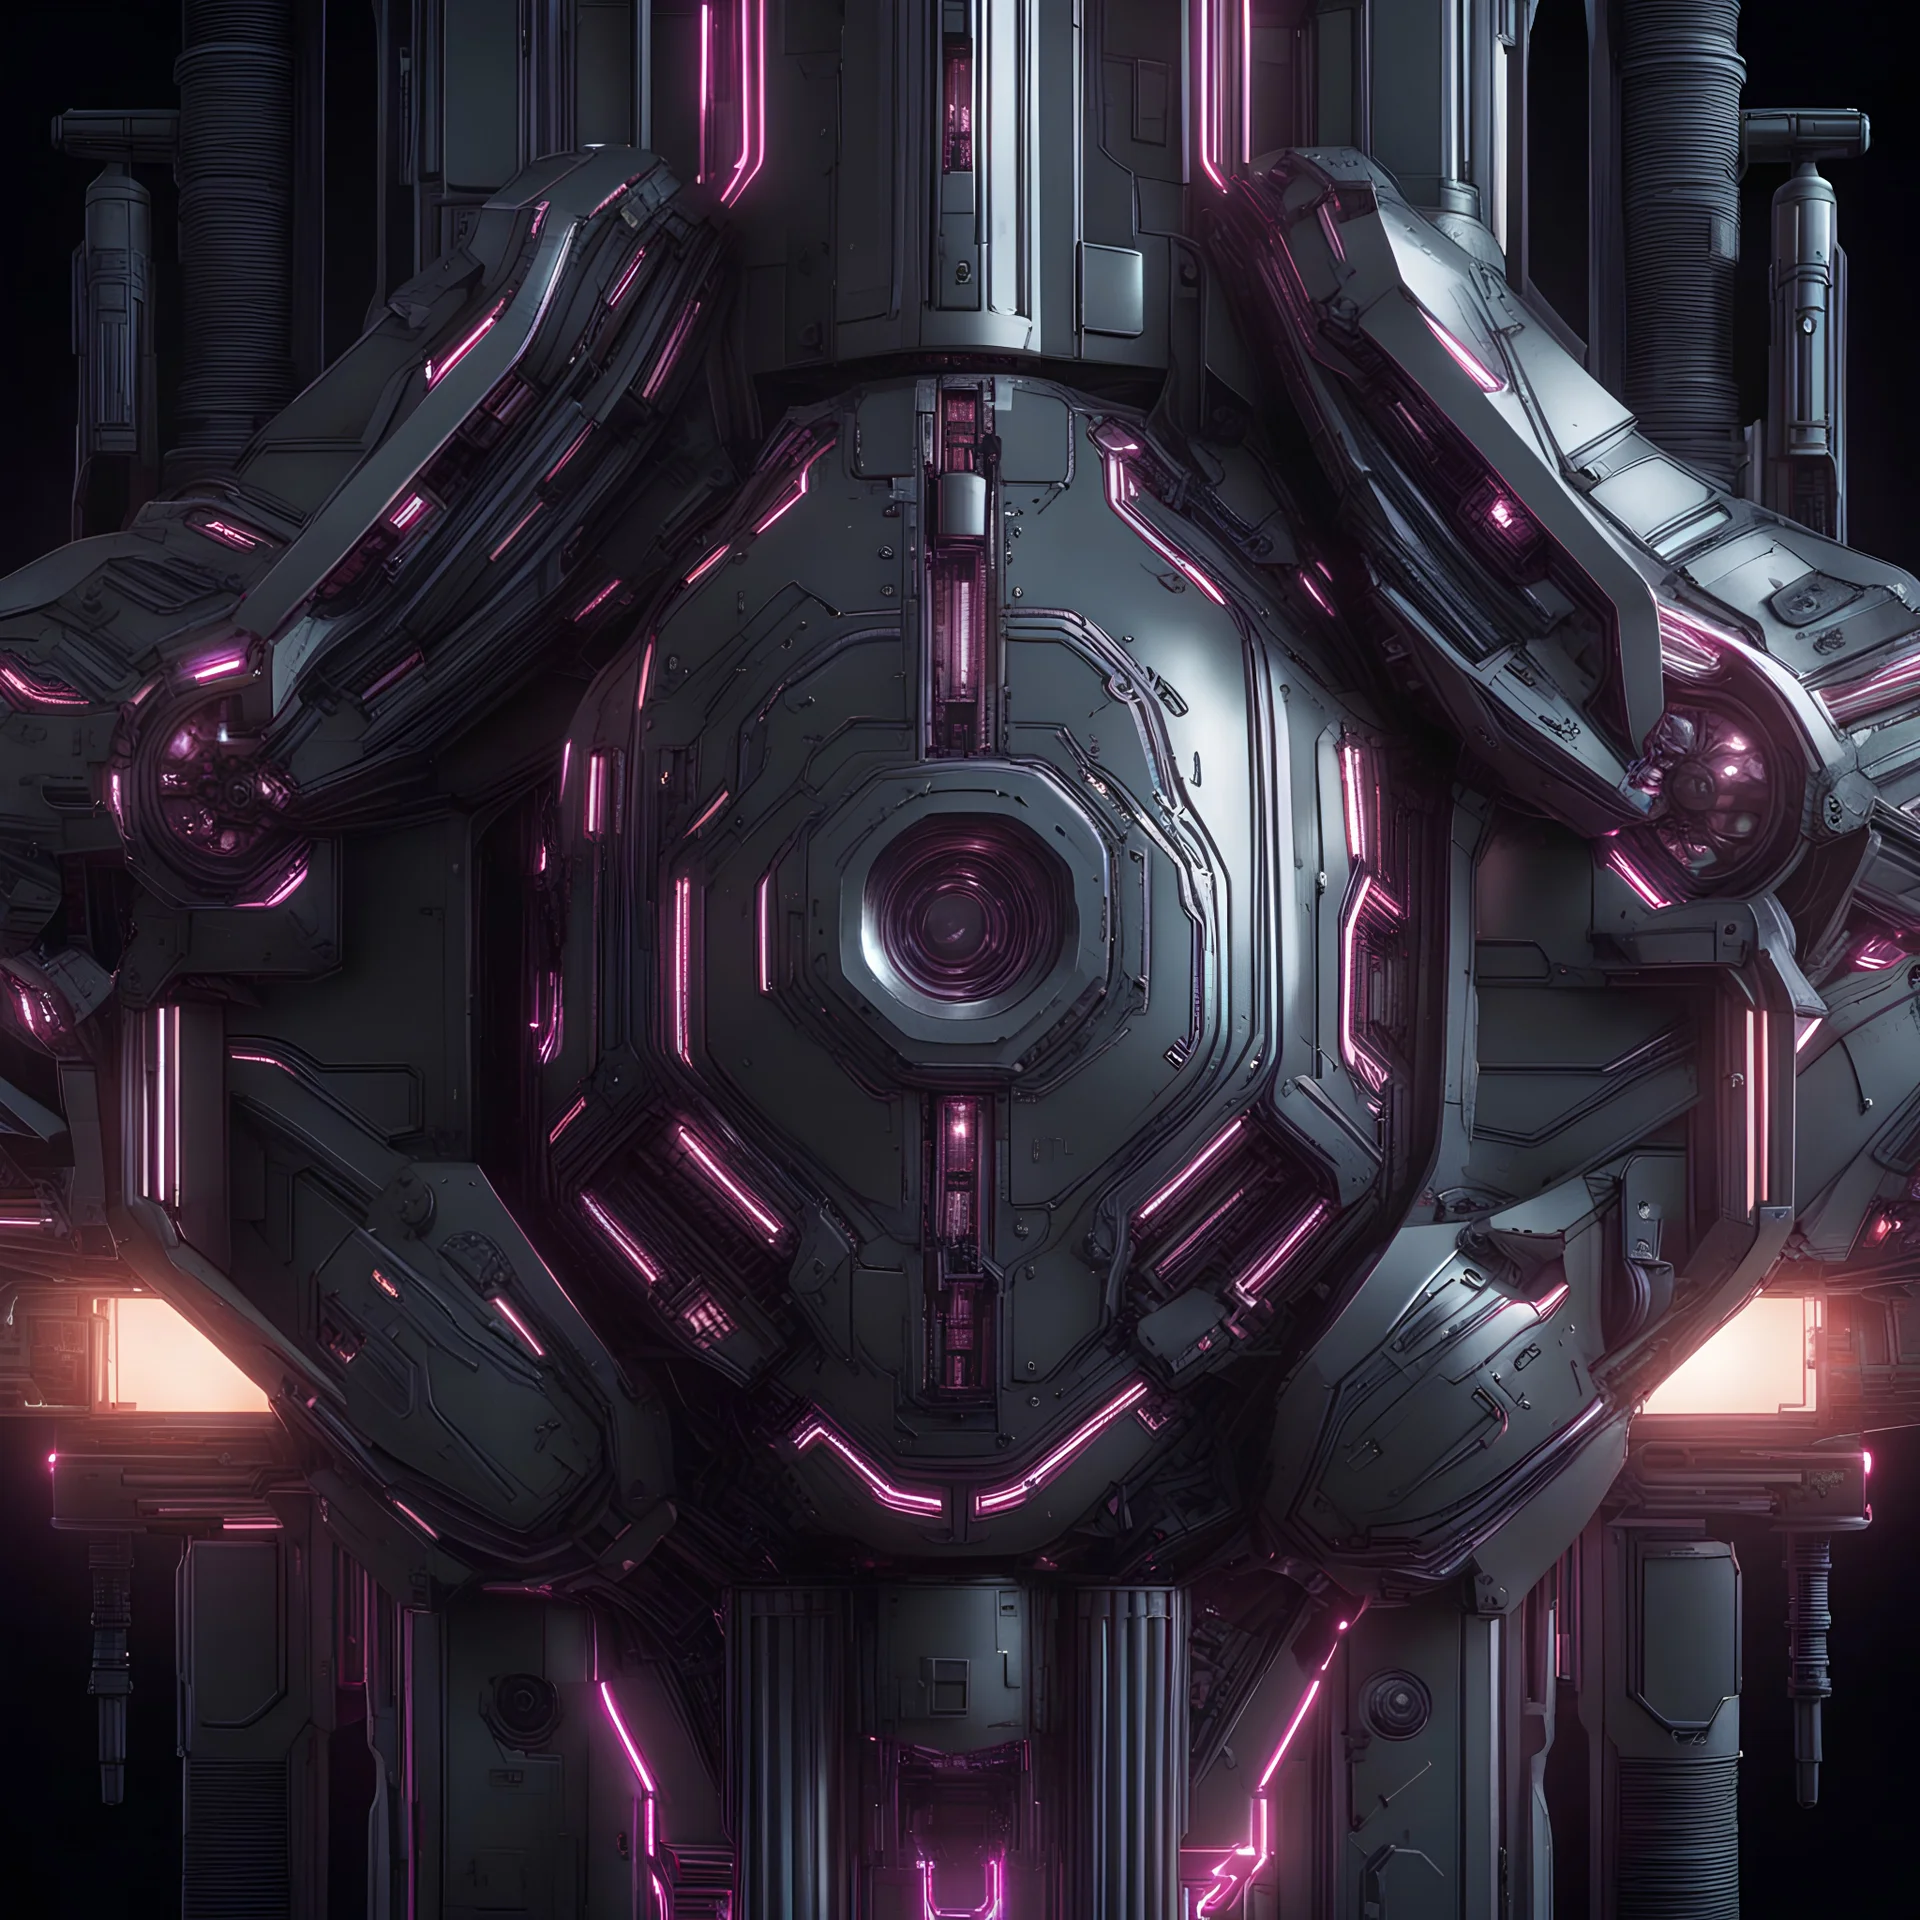 the capital letter H. Encased in a futuristic object with lots of greebling, lasers, tubes, cyberpunk details. it looks like a spaceship. background is black.